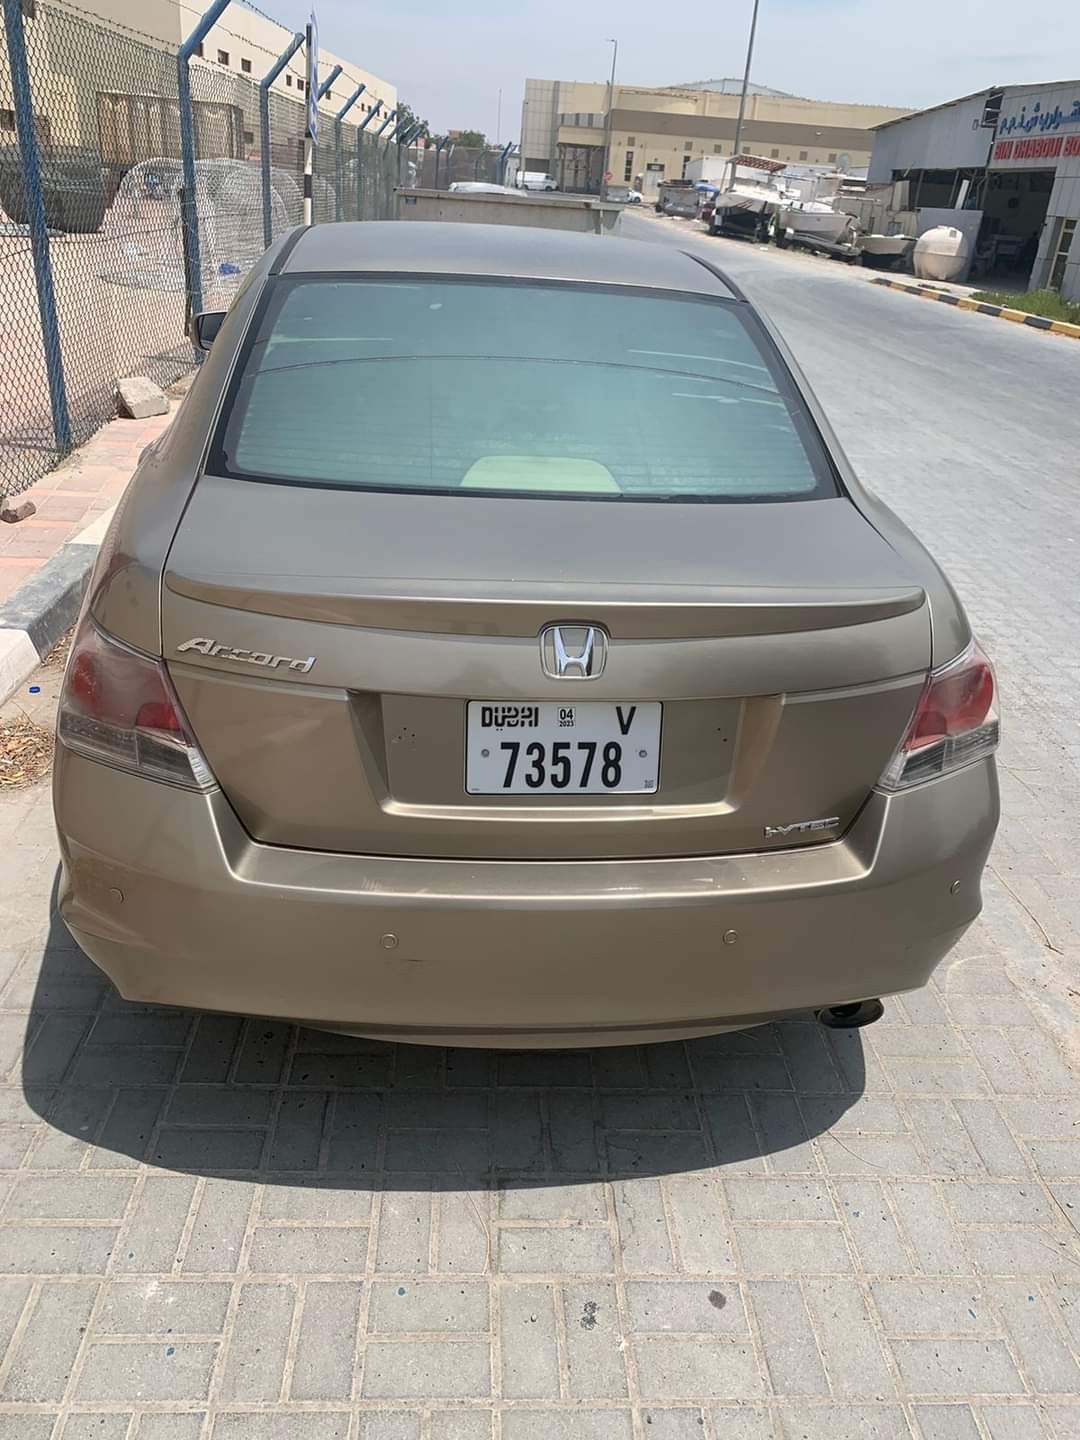 Honda Accord 2009 in good condition, price 8000 aed